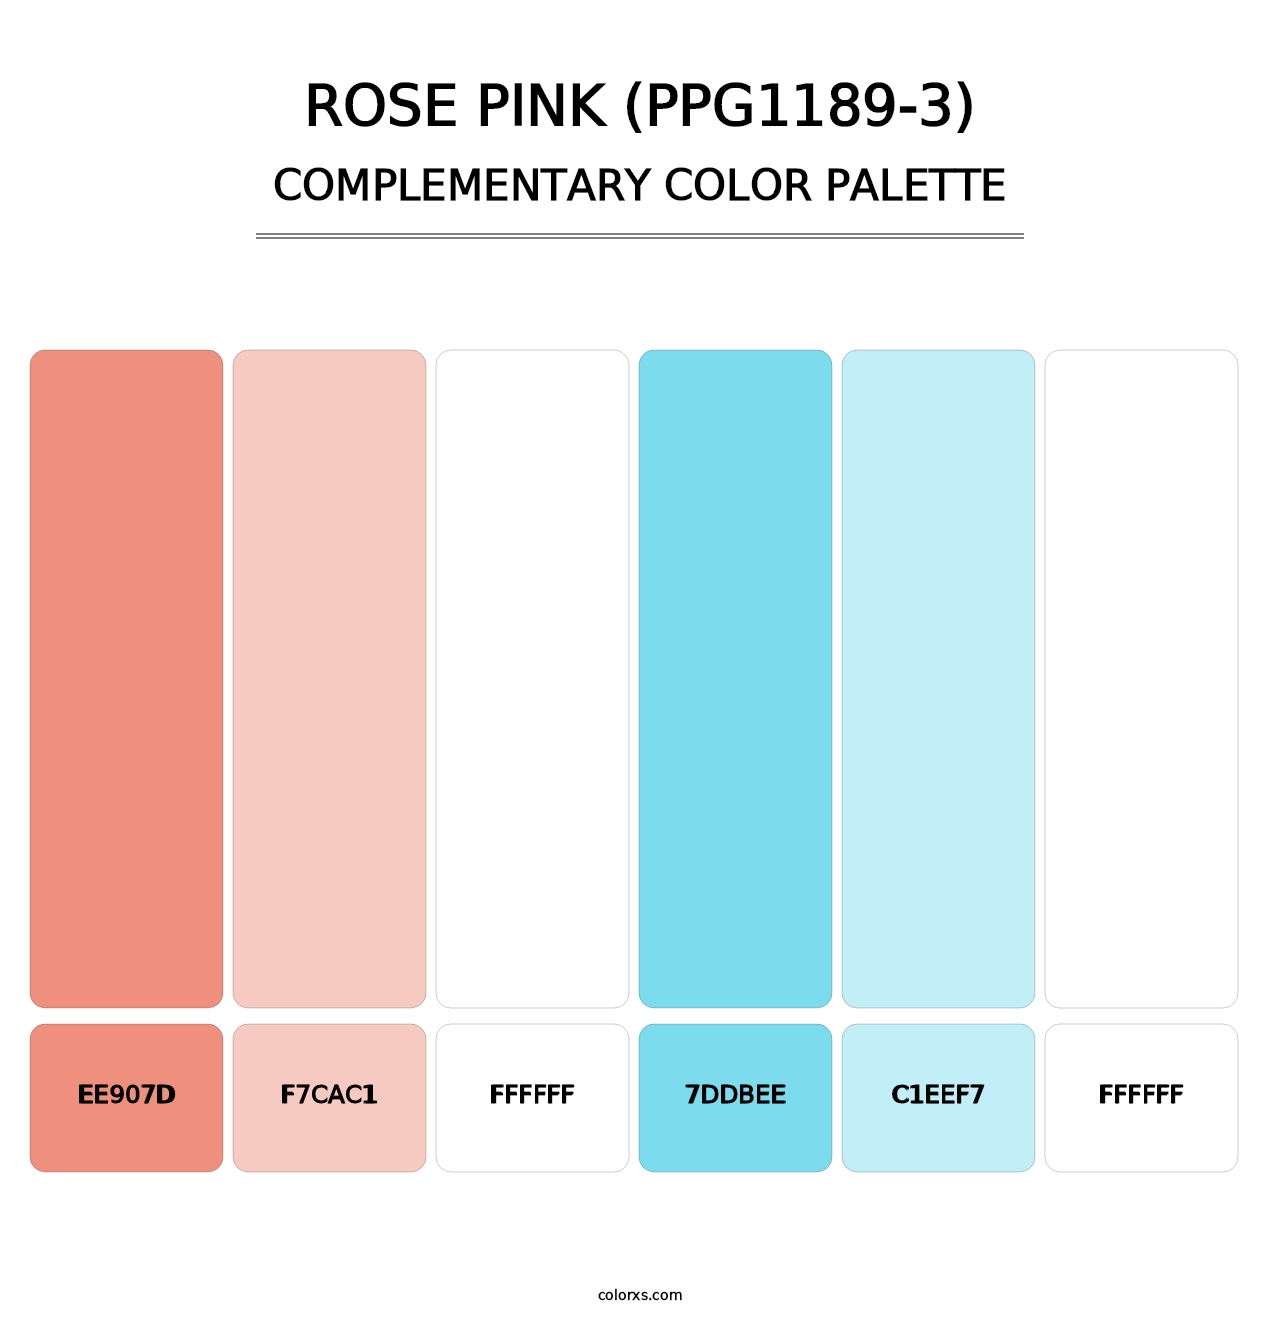 Rose Pink (PPG1189-3) - Complementary Color Palette